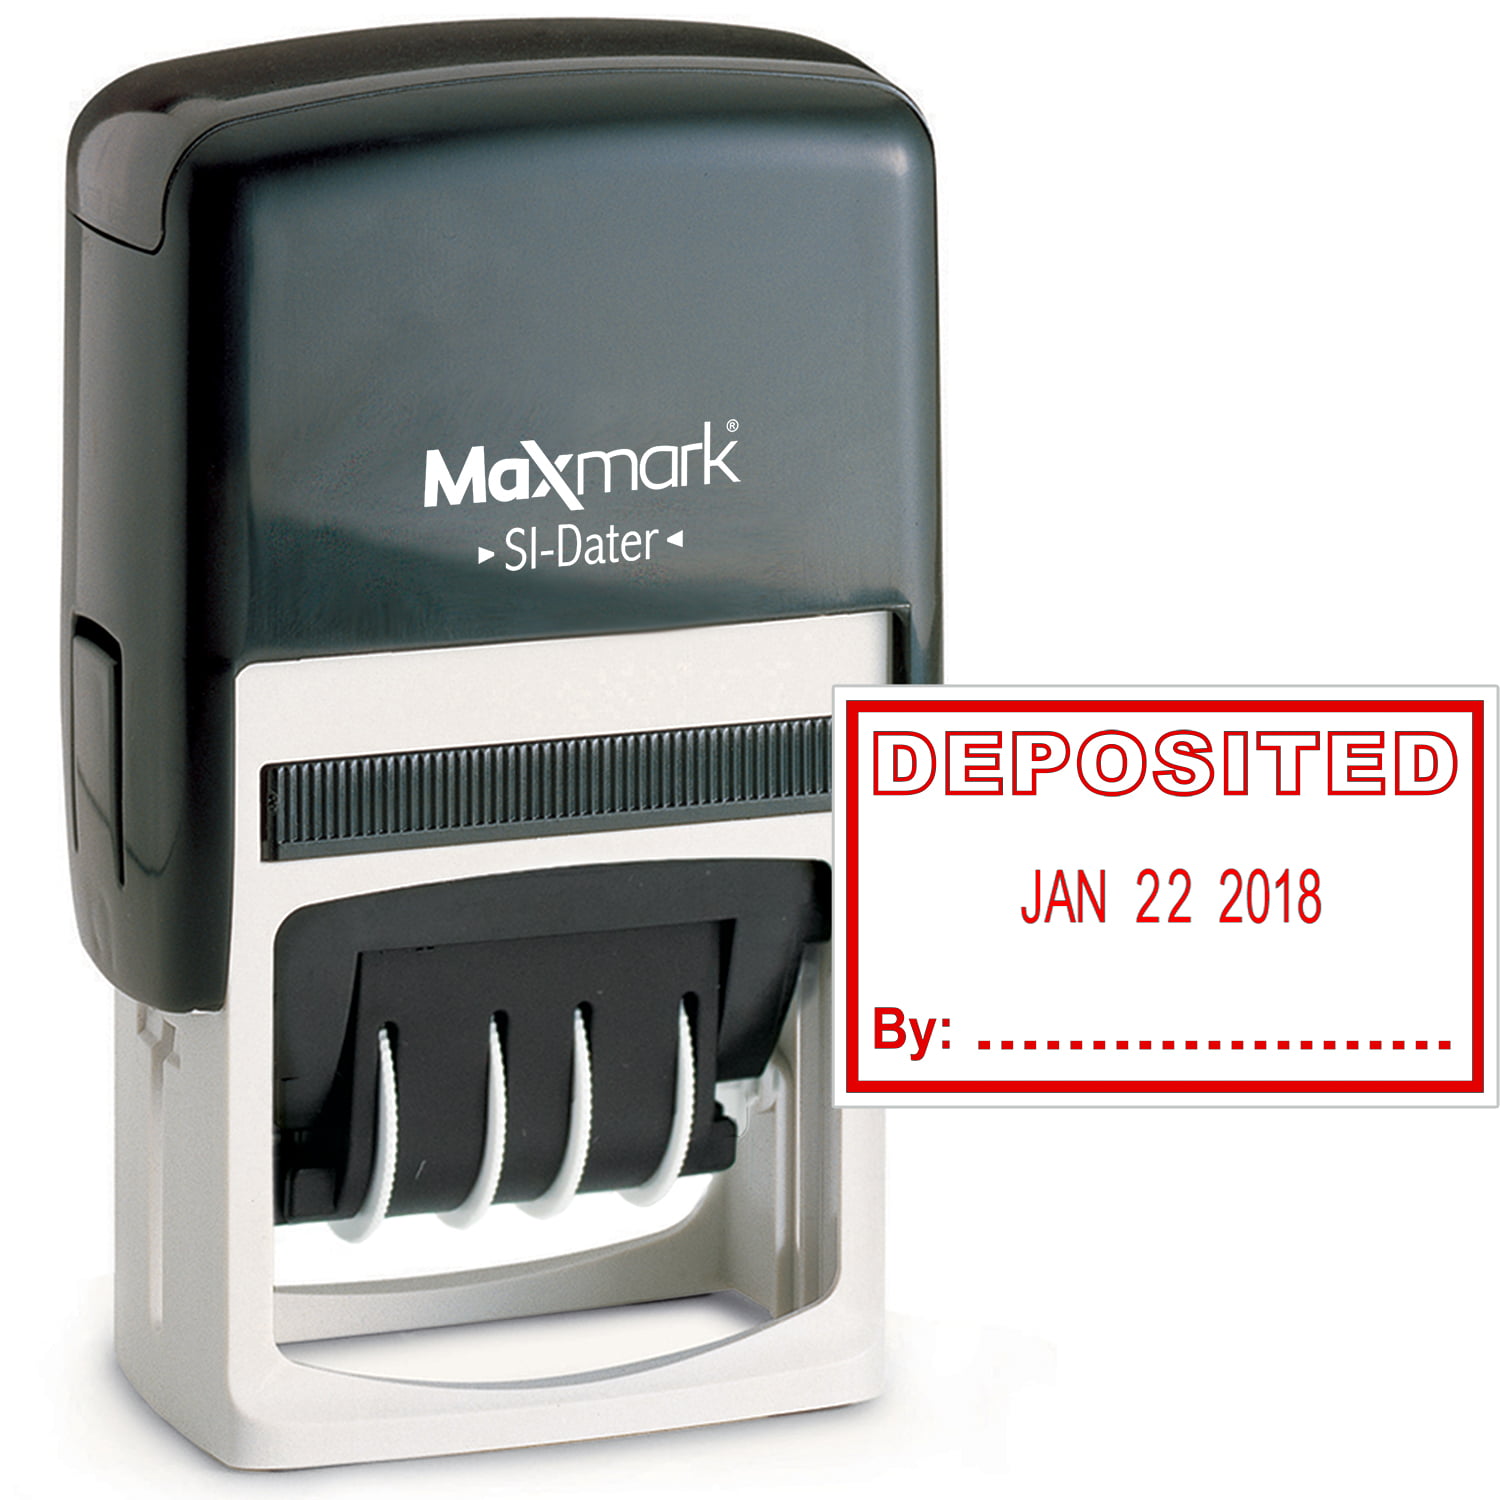 12-Year Band Max Dater II Black Ink MaxMark Self-Inking Rubber Date Office Stamp with DEPOSITED Phrase & Date 